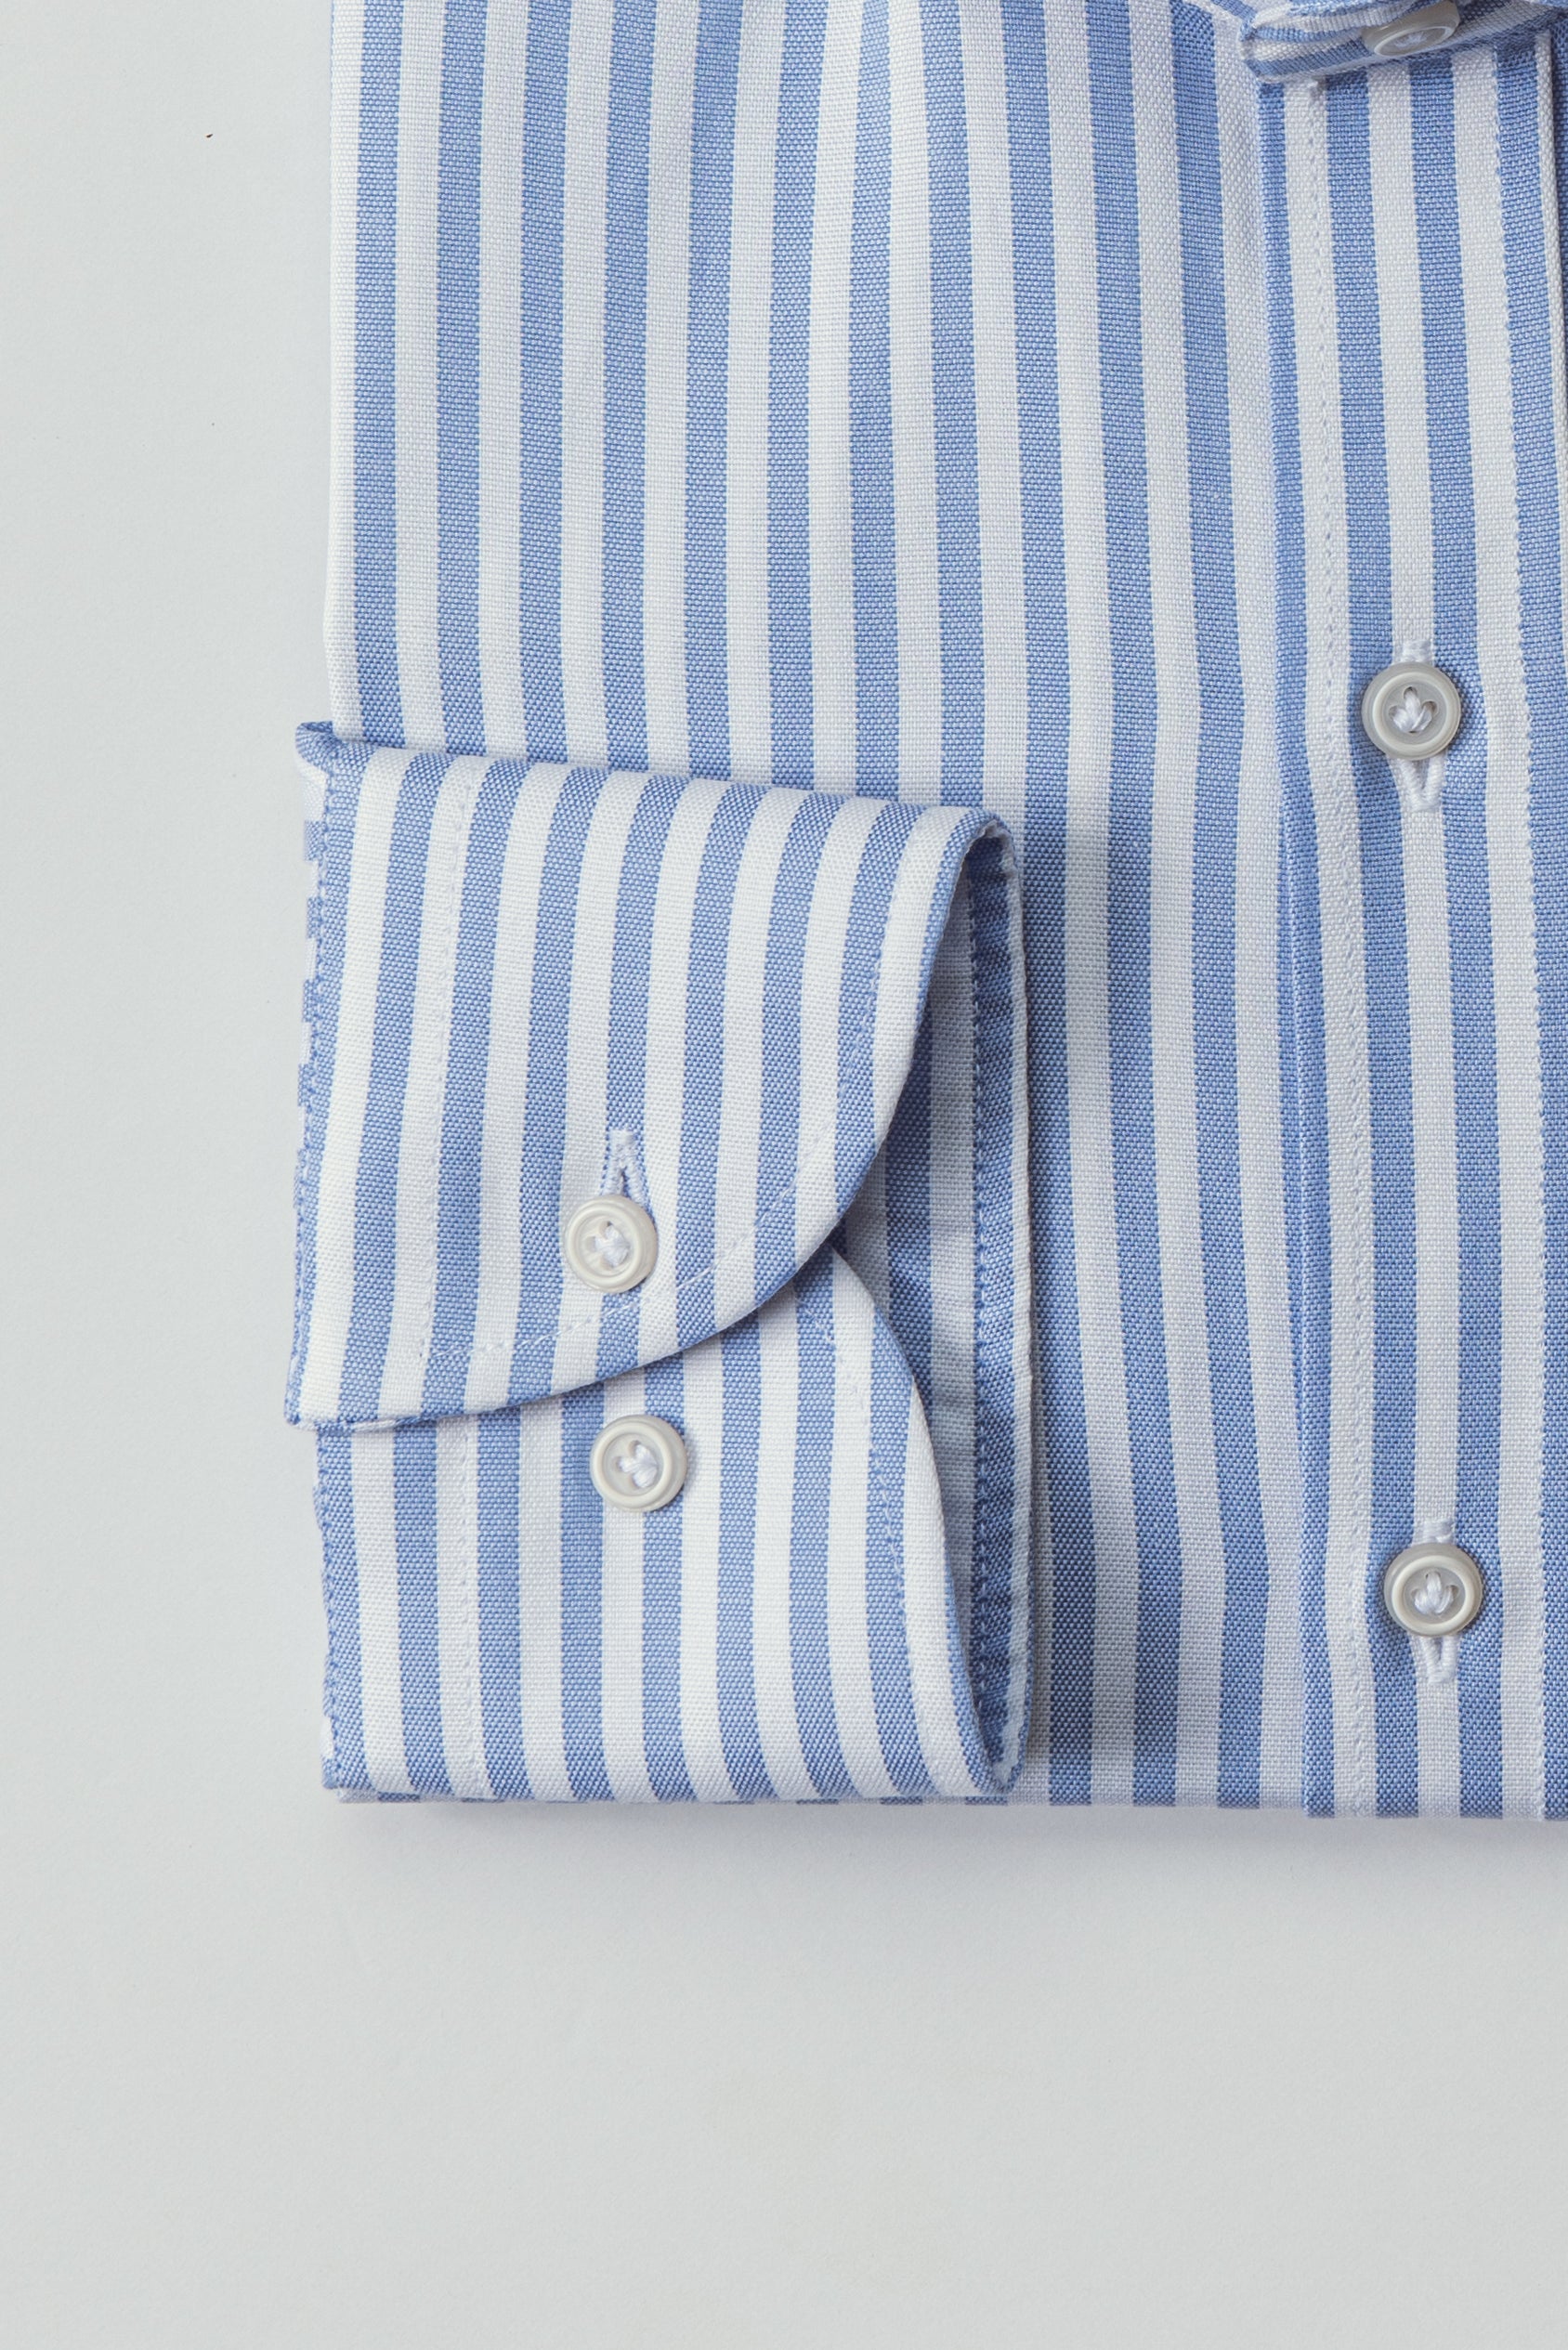 STRIPED WASHED OXFORD SLIM FIT SHIRT